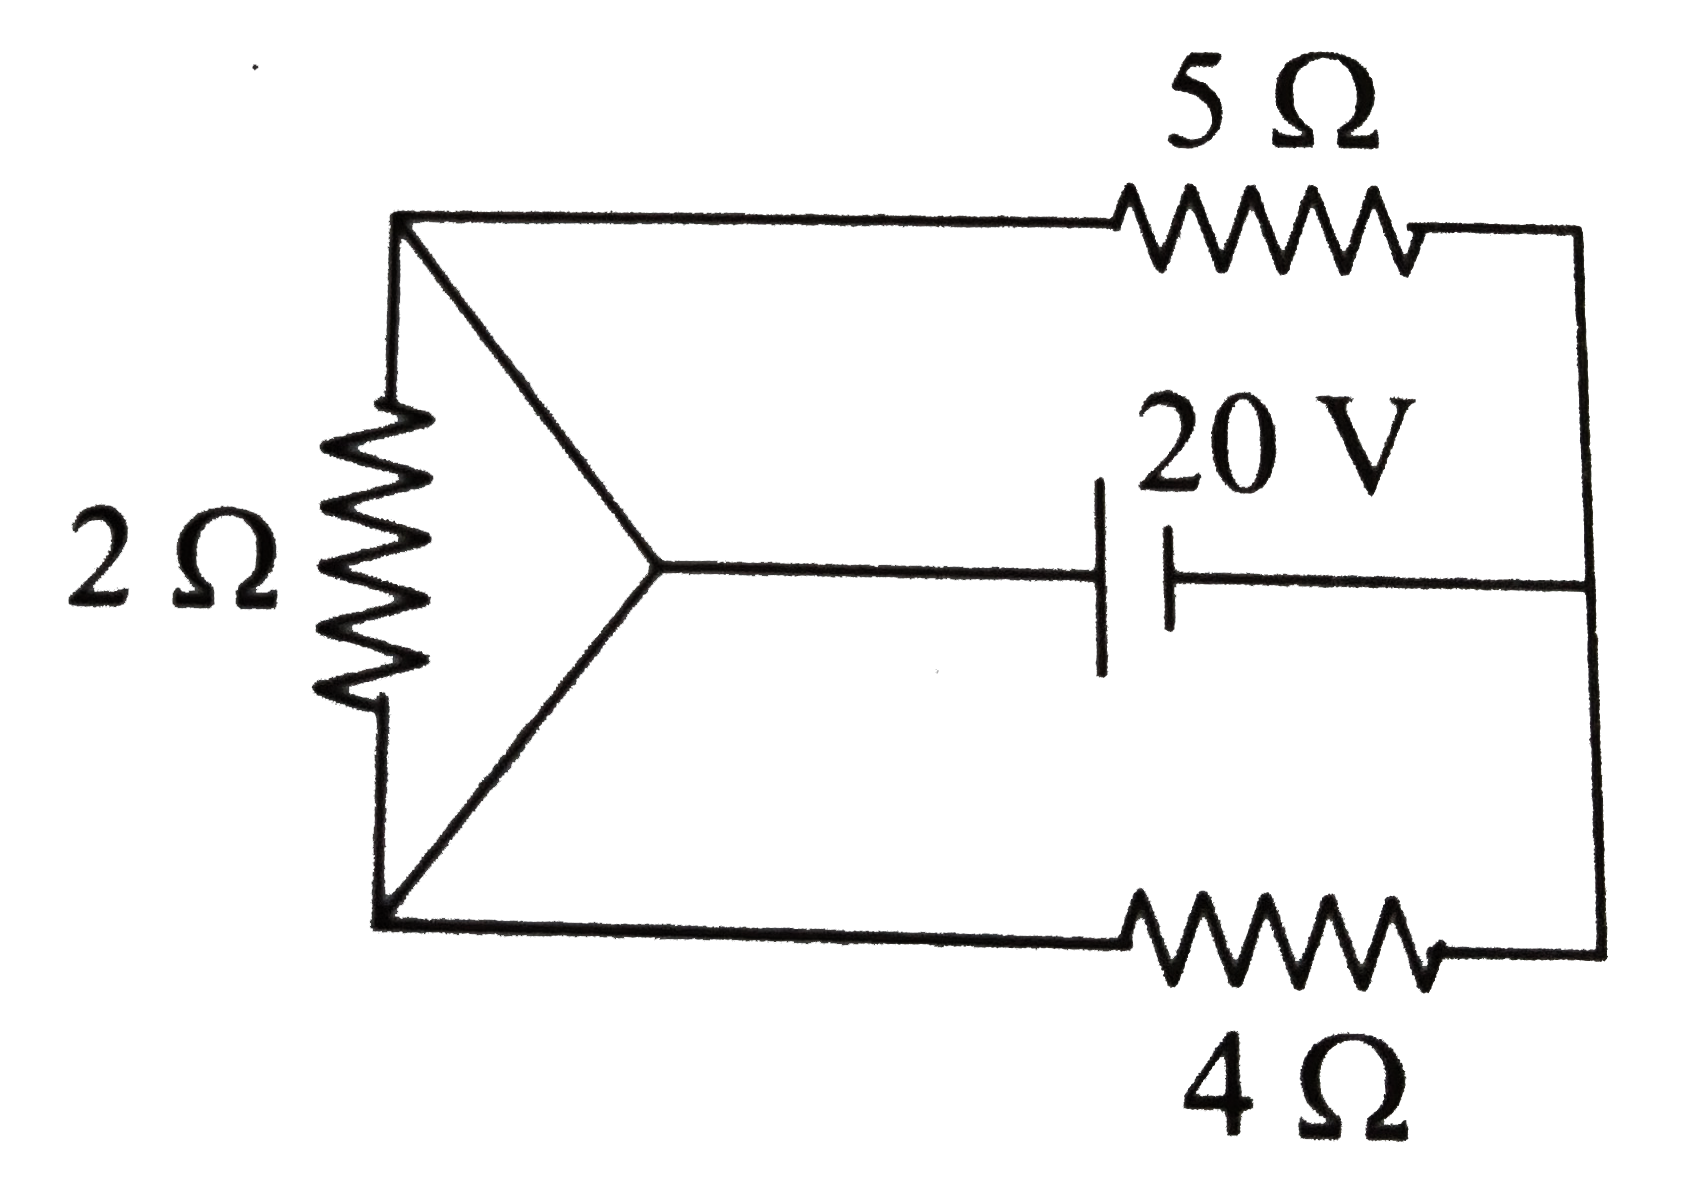 In the circuit shown in the figure   .